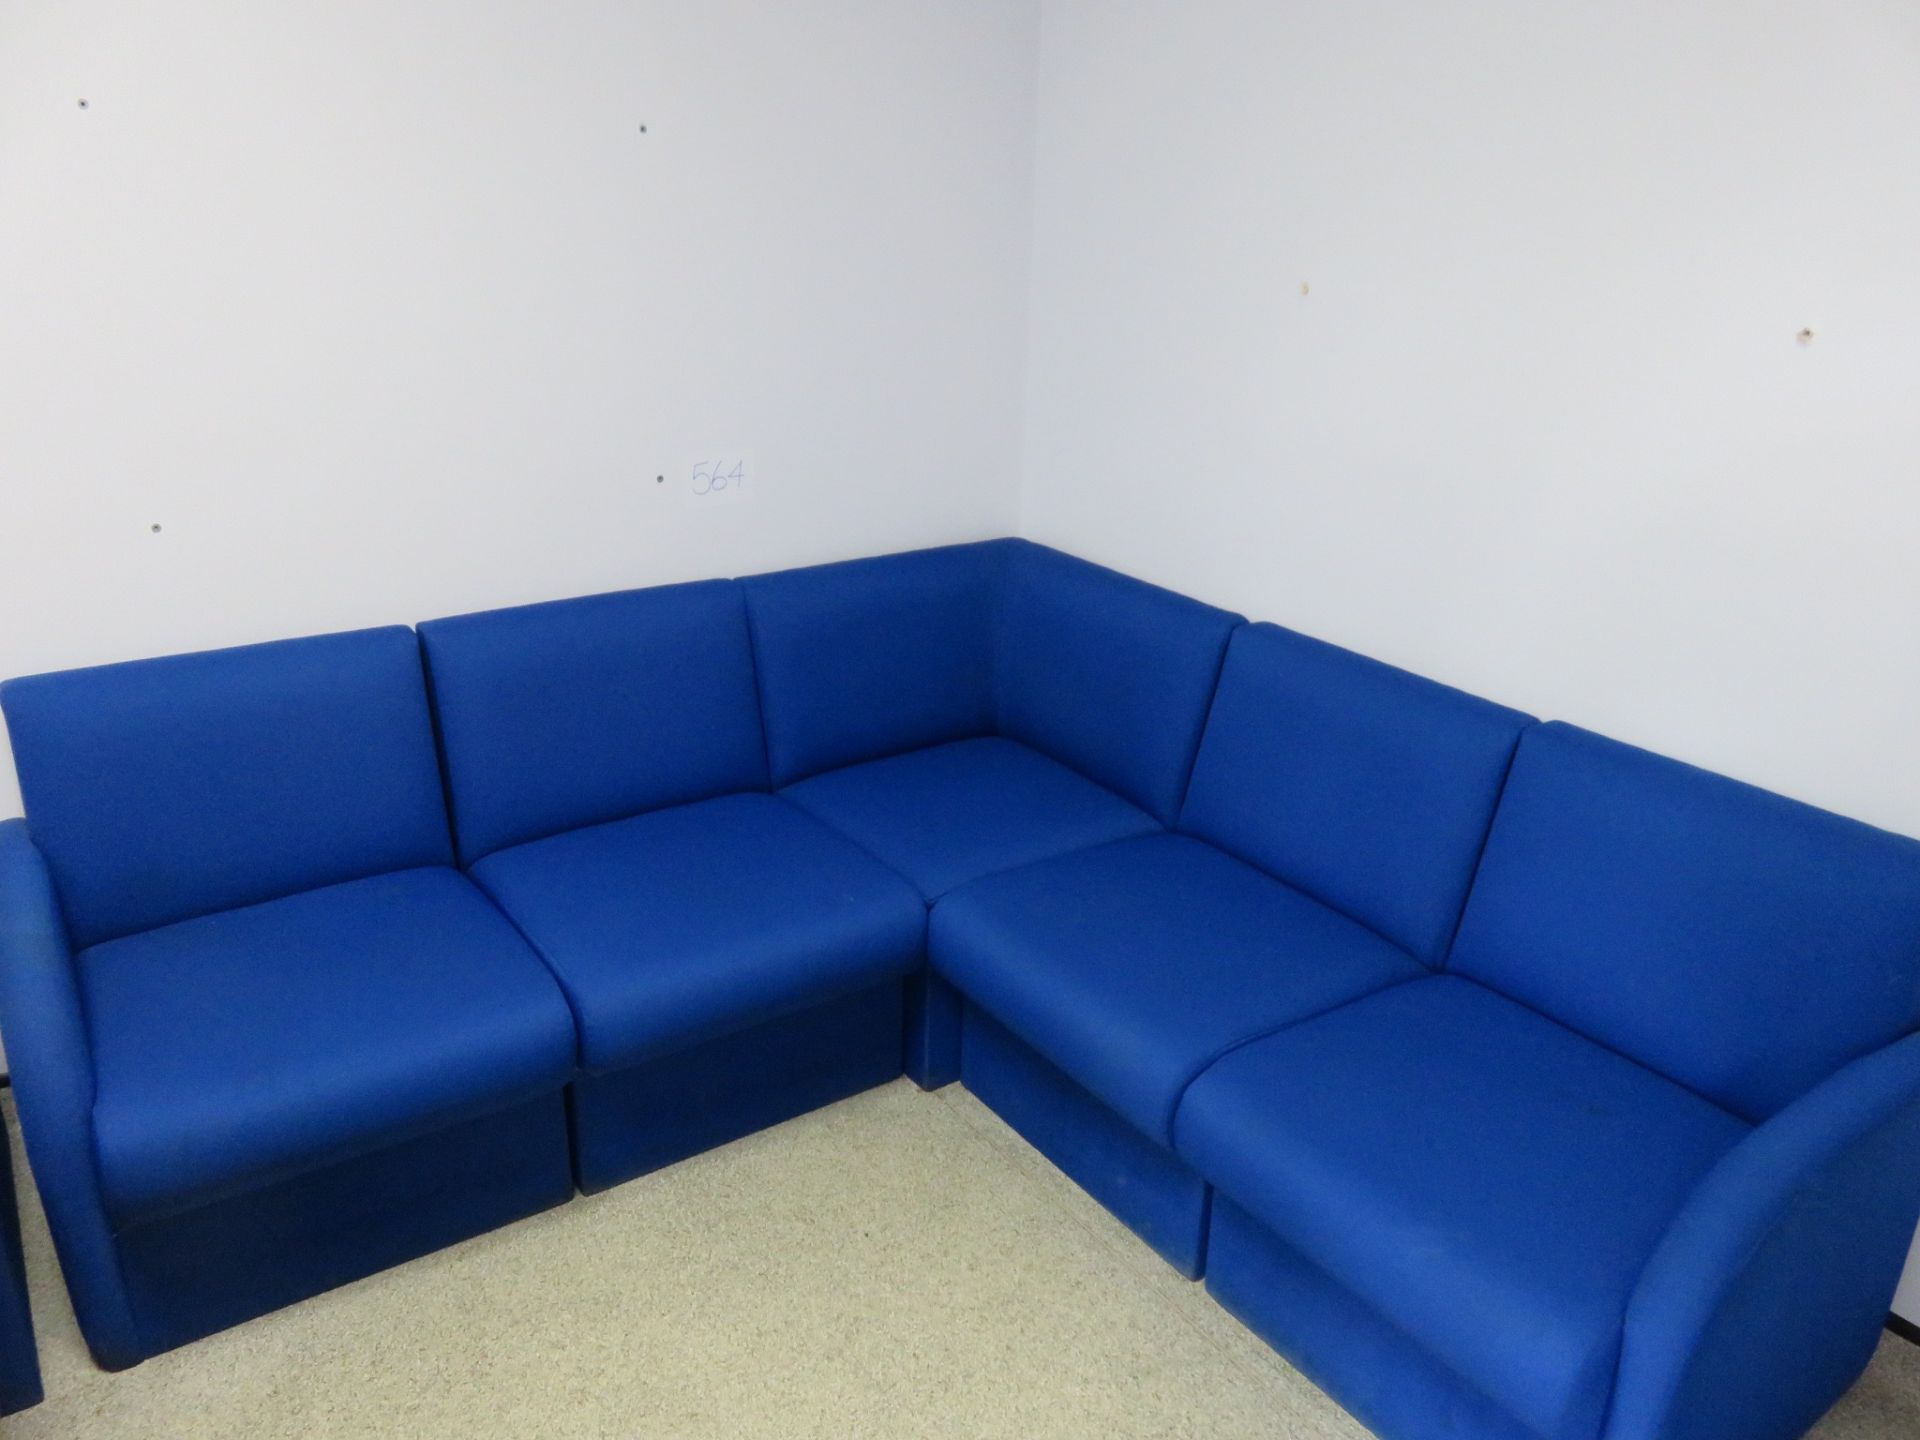 1 x blue settee. Lift Out £10